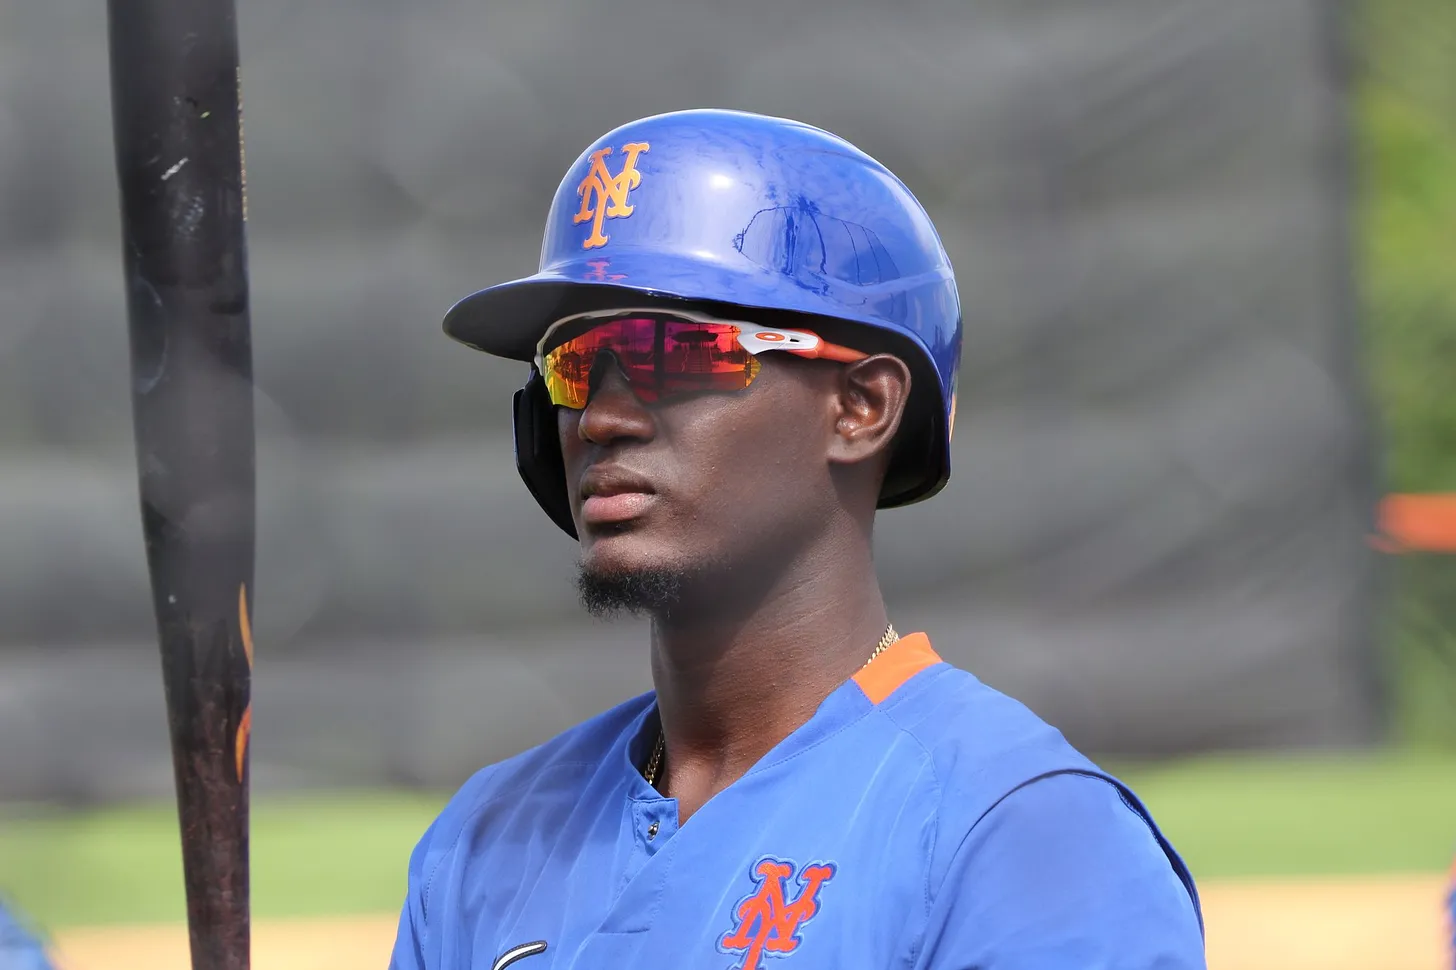 Ronny Mauricio stands during batting practice for the New York Mets.